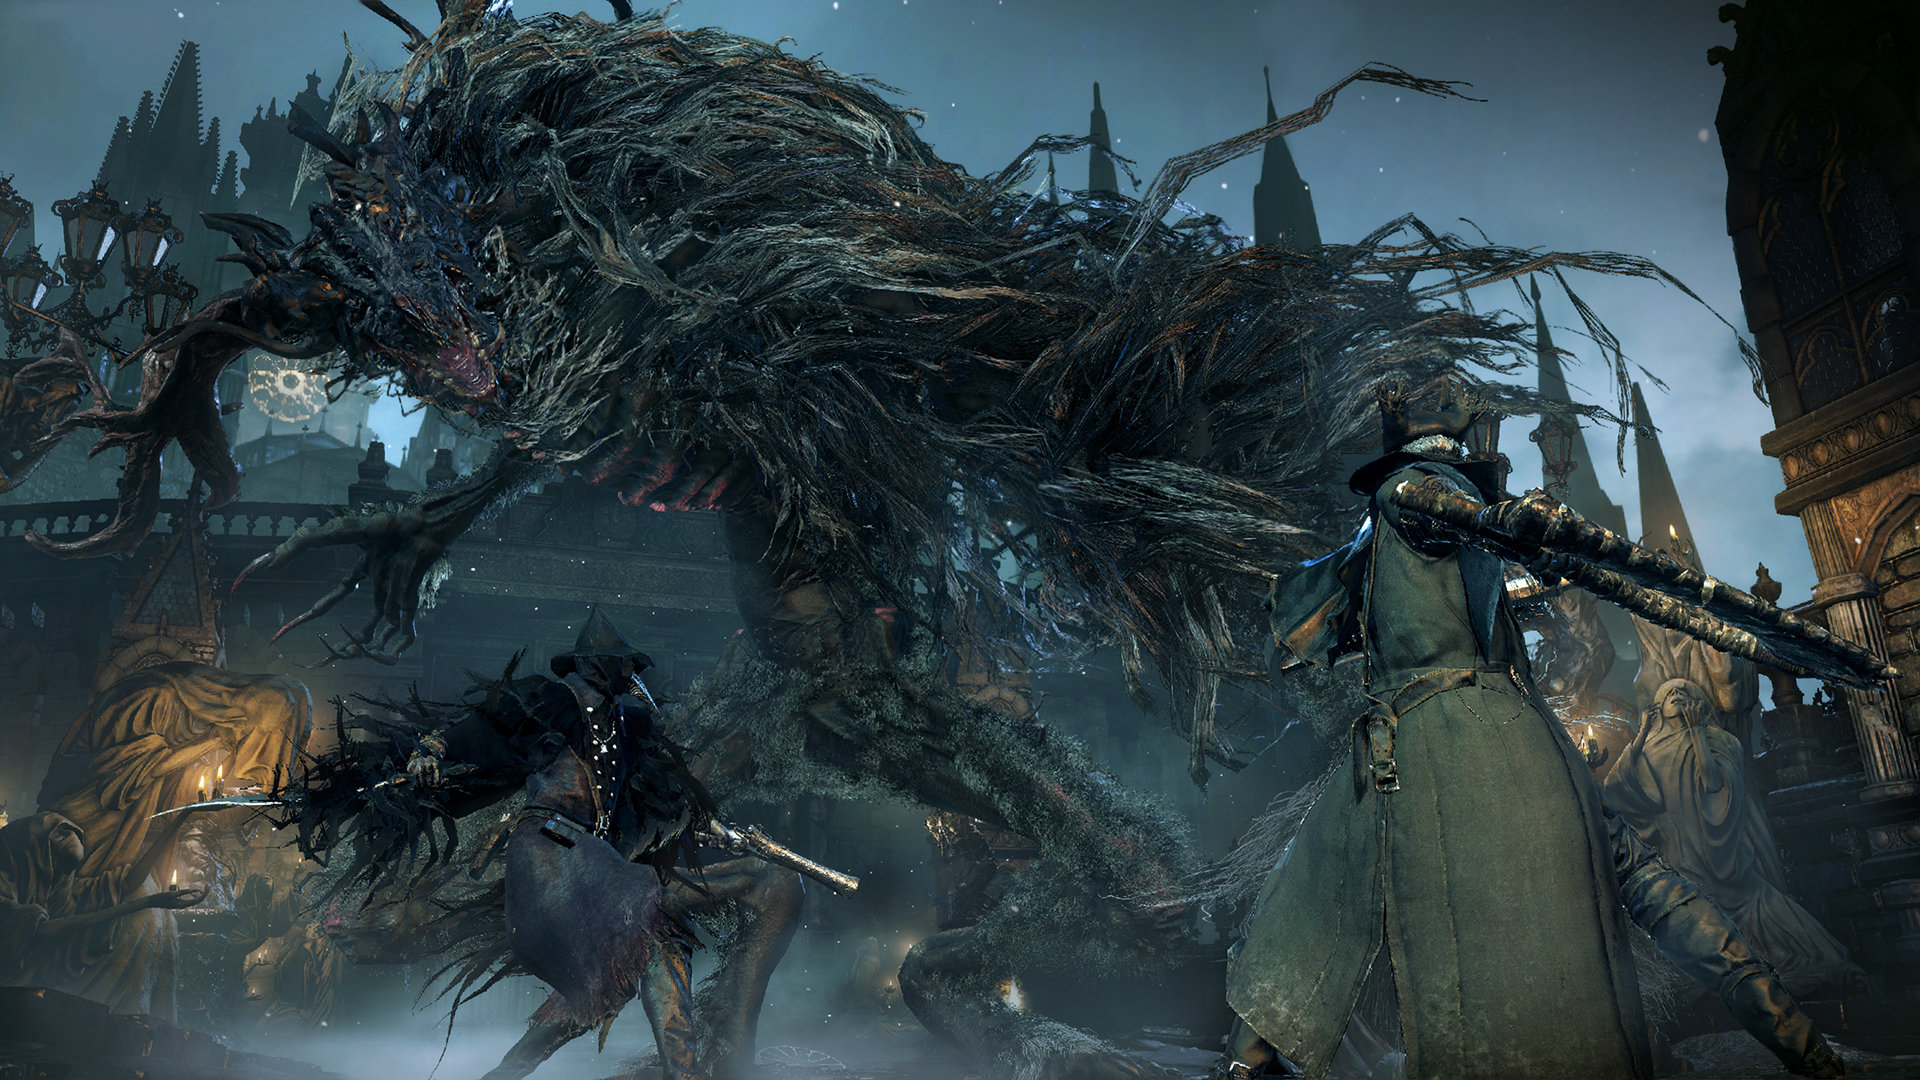 A horrifying monster stands tall in Bloodborne.